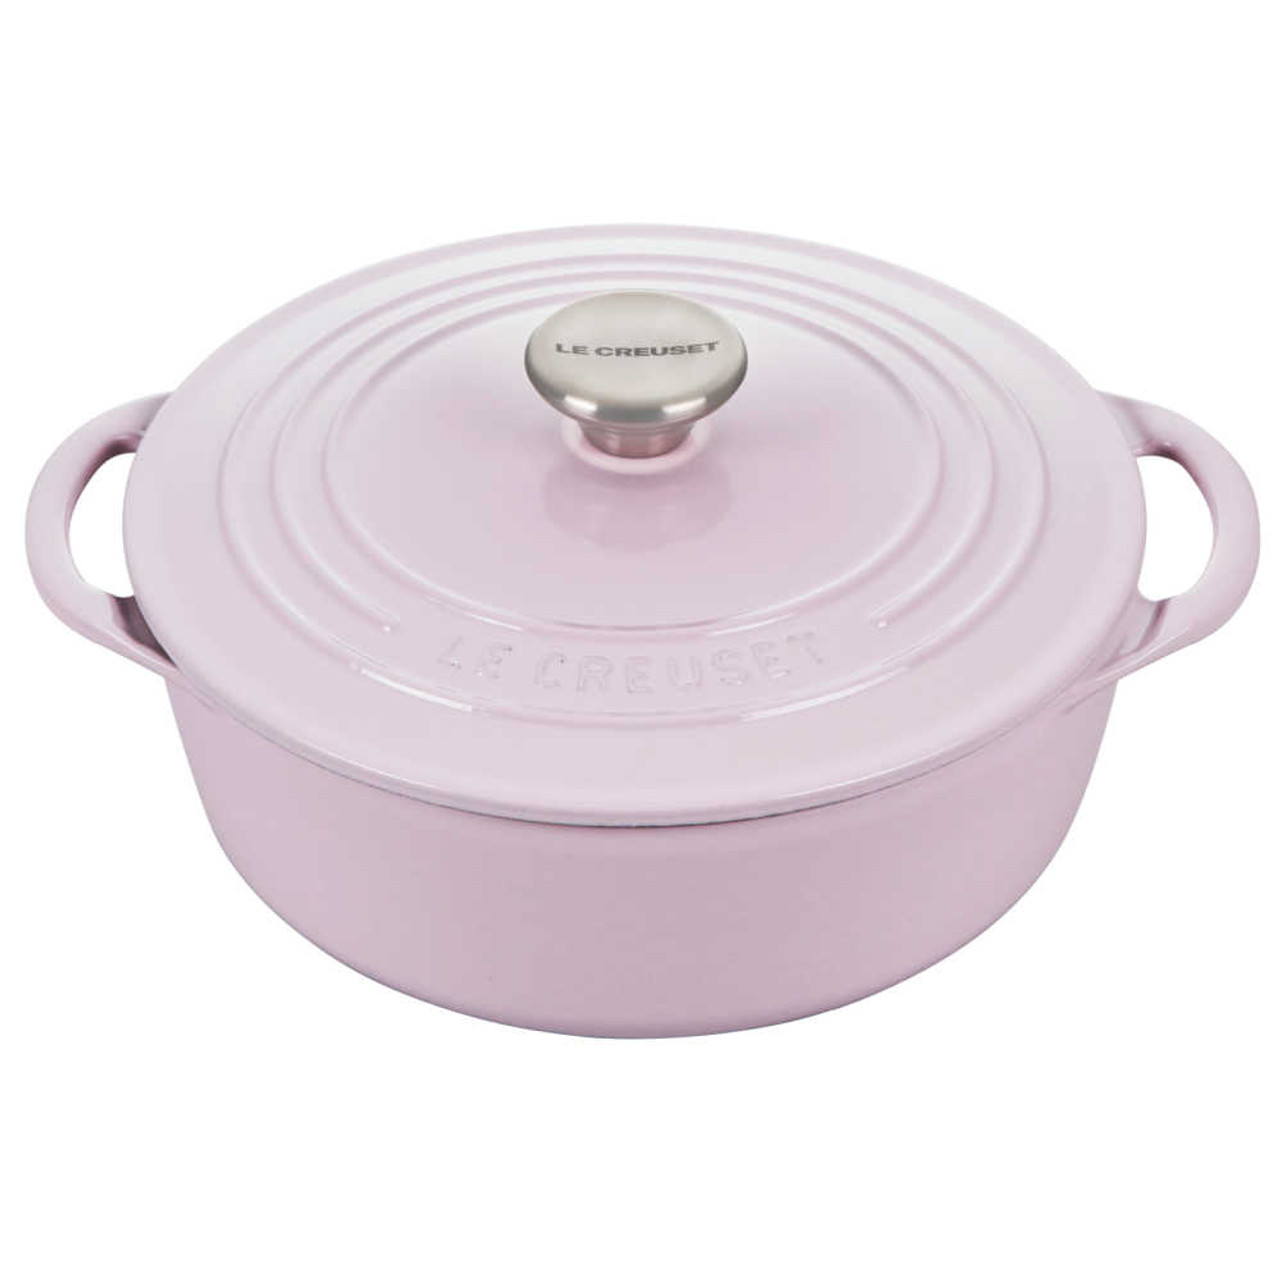 https://cdn11.bigcommerce.com/s-hccytny0od/images/stencil/1280x1280/products/5300/23011/Le_Creuset_Shallow_Round_Dutch_Oven_Shallot__05867.1679425526.jpg?c=2?imbypass=on